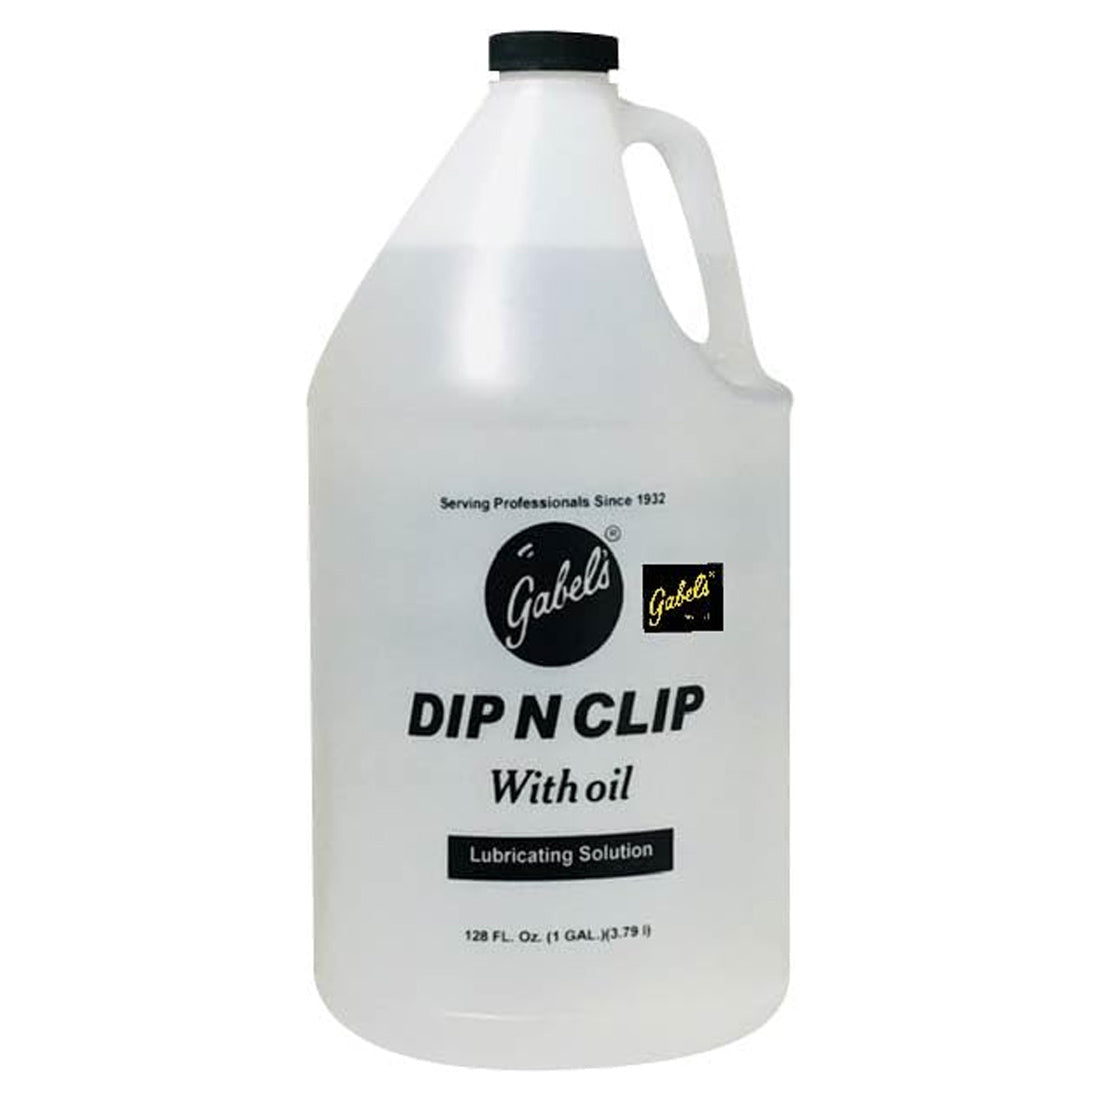 Gabel's Dip n Clip with Oil One Gallon